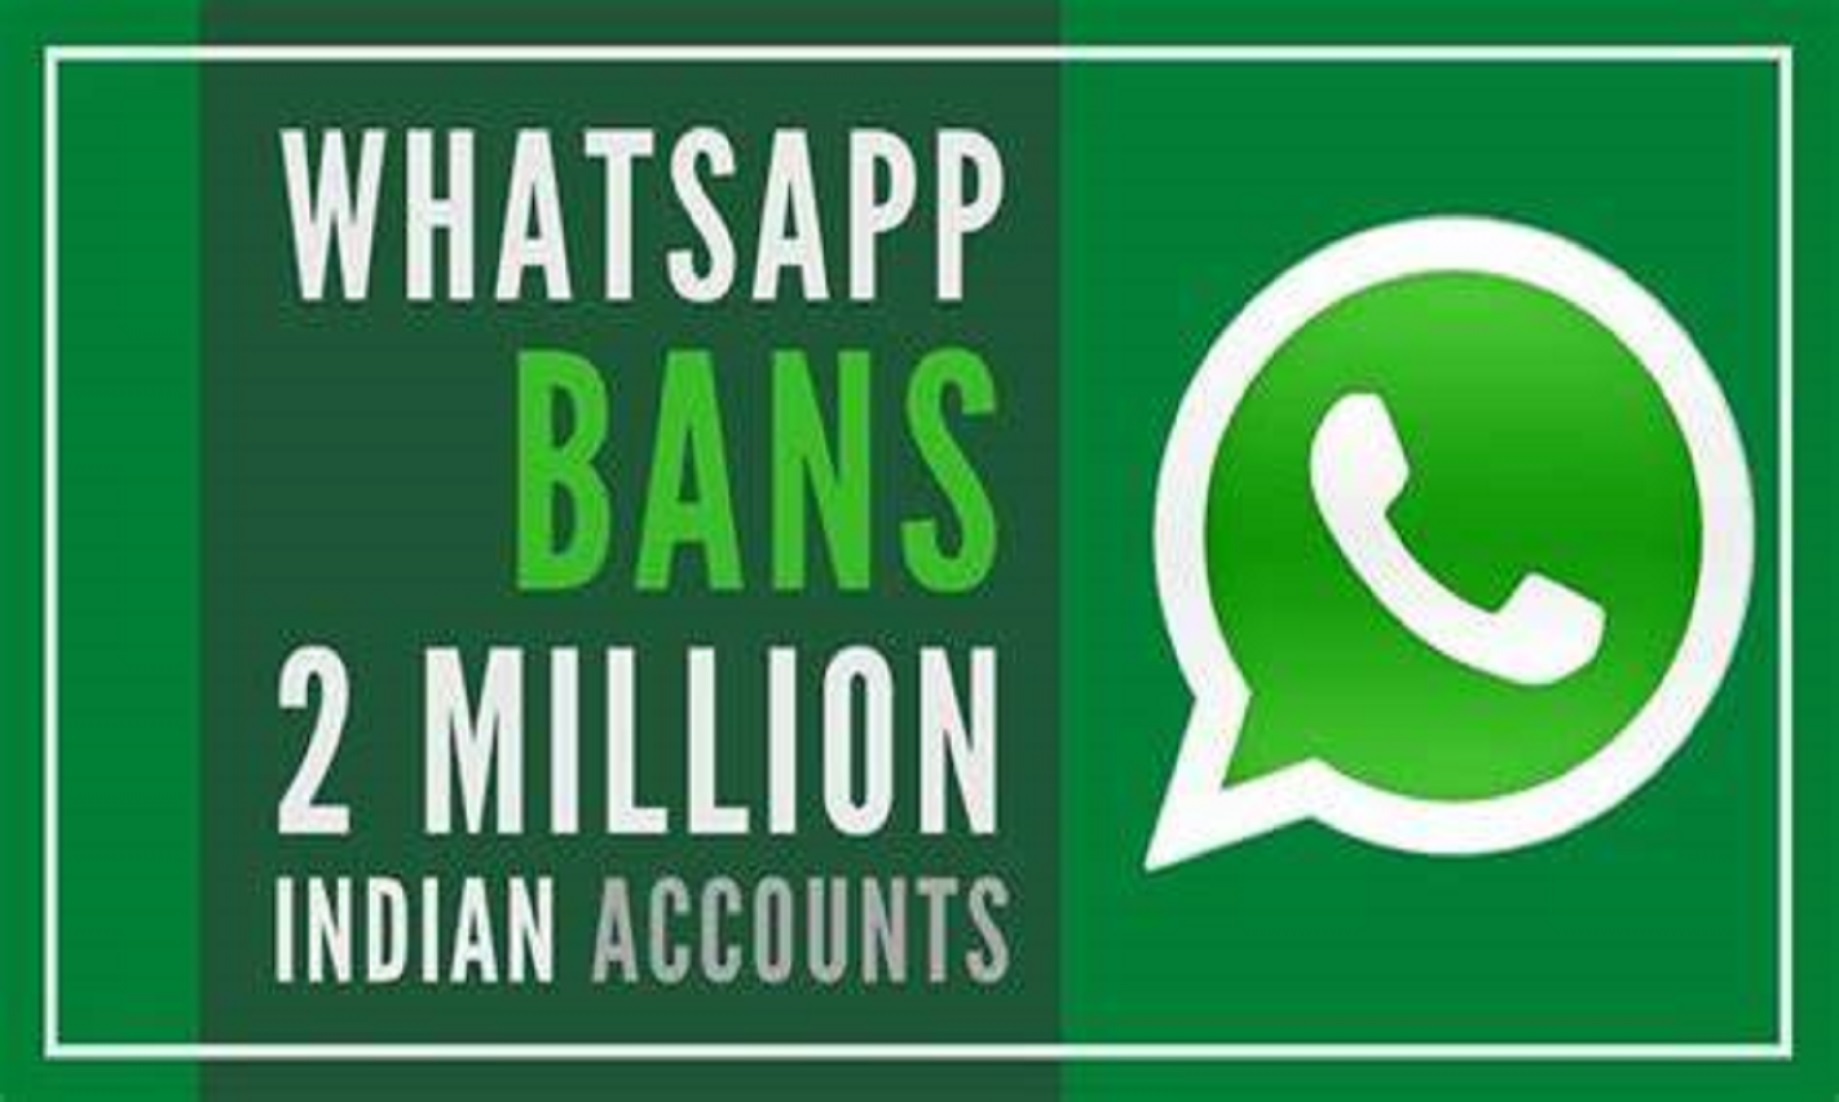 Over 1.75 Million Indian Users Banned From Messenger Platform Whatsapp